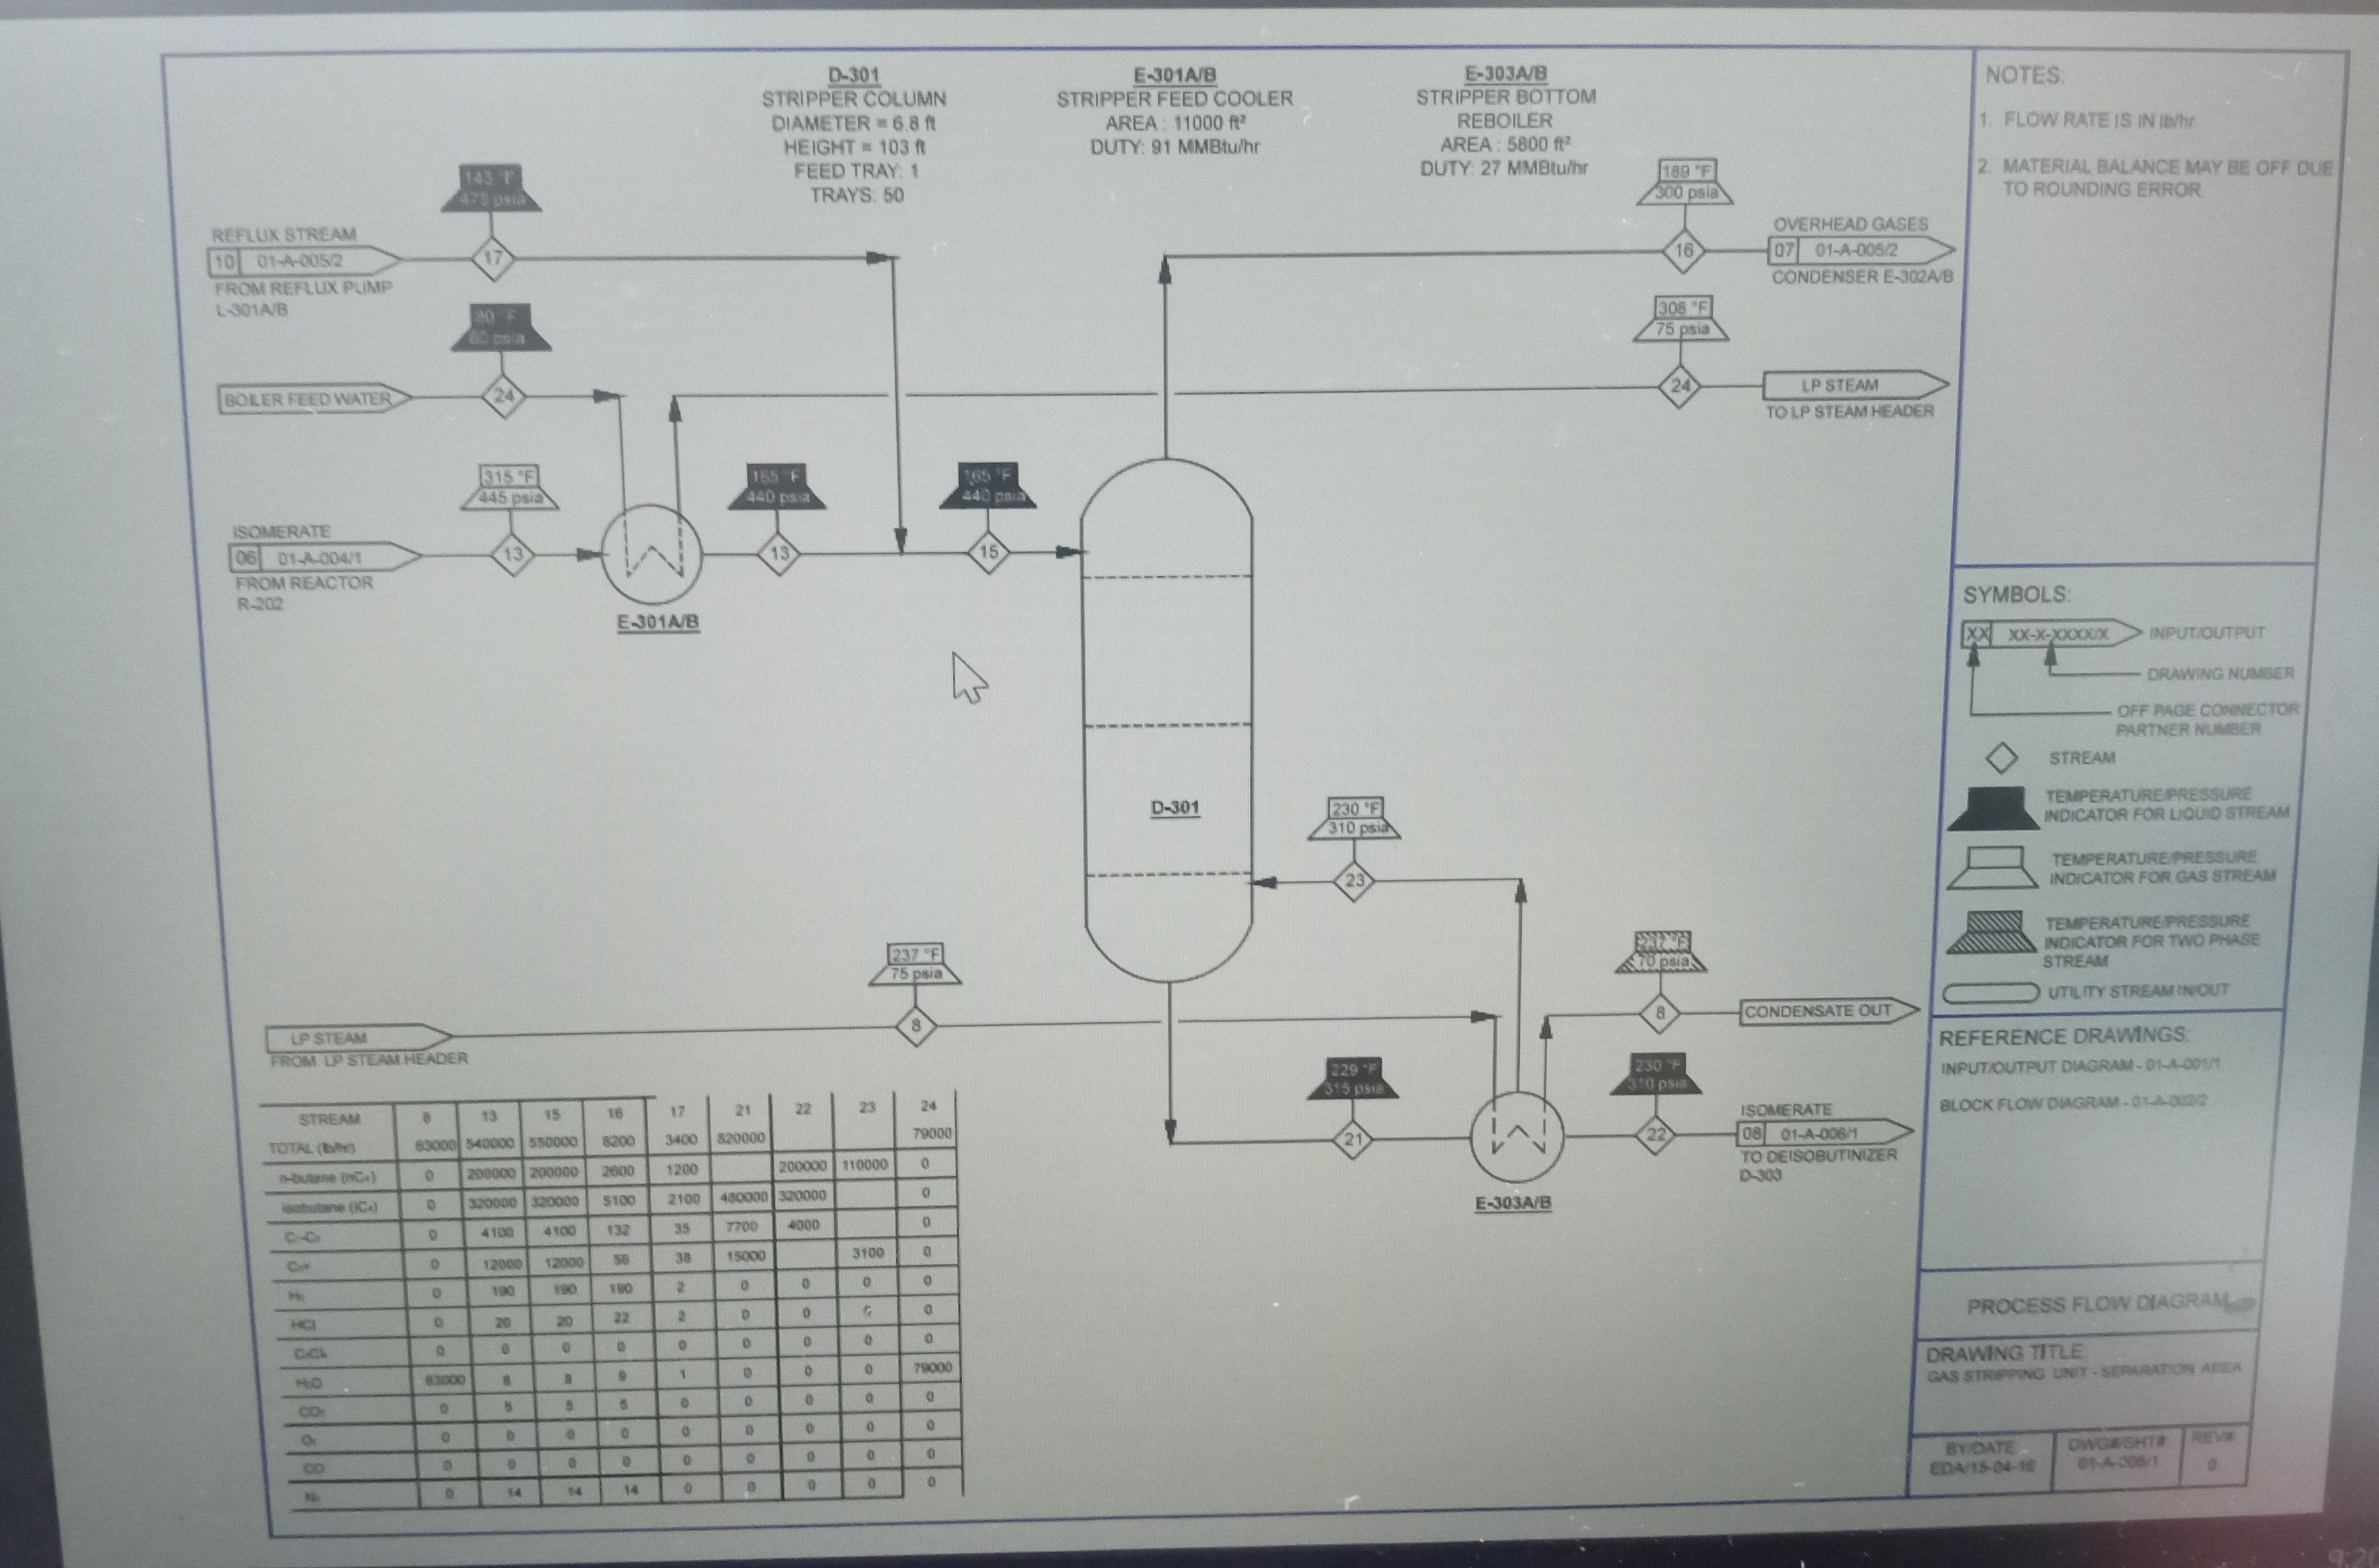 SOLVED The attached drawing 01A005/1 is a process flow diagram (PFD